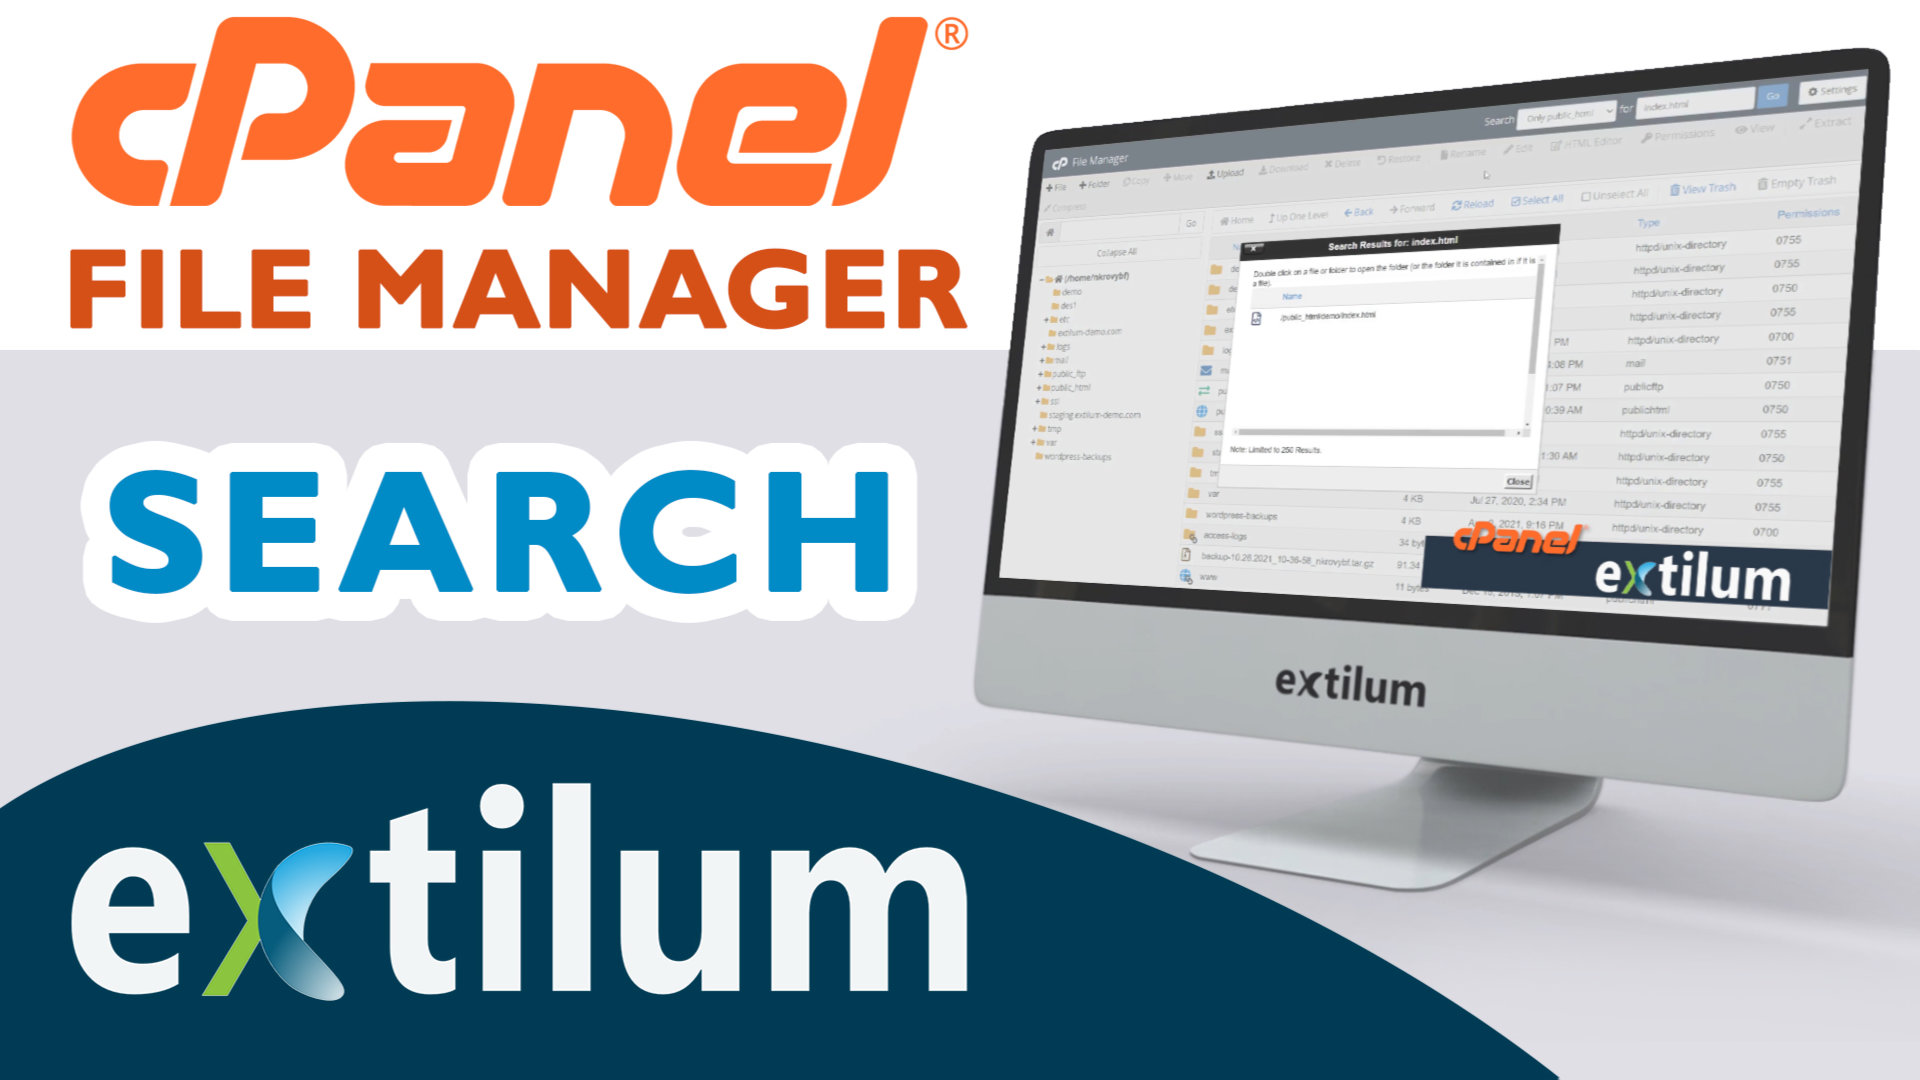 Extilum cpanel - file manager - search